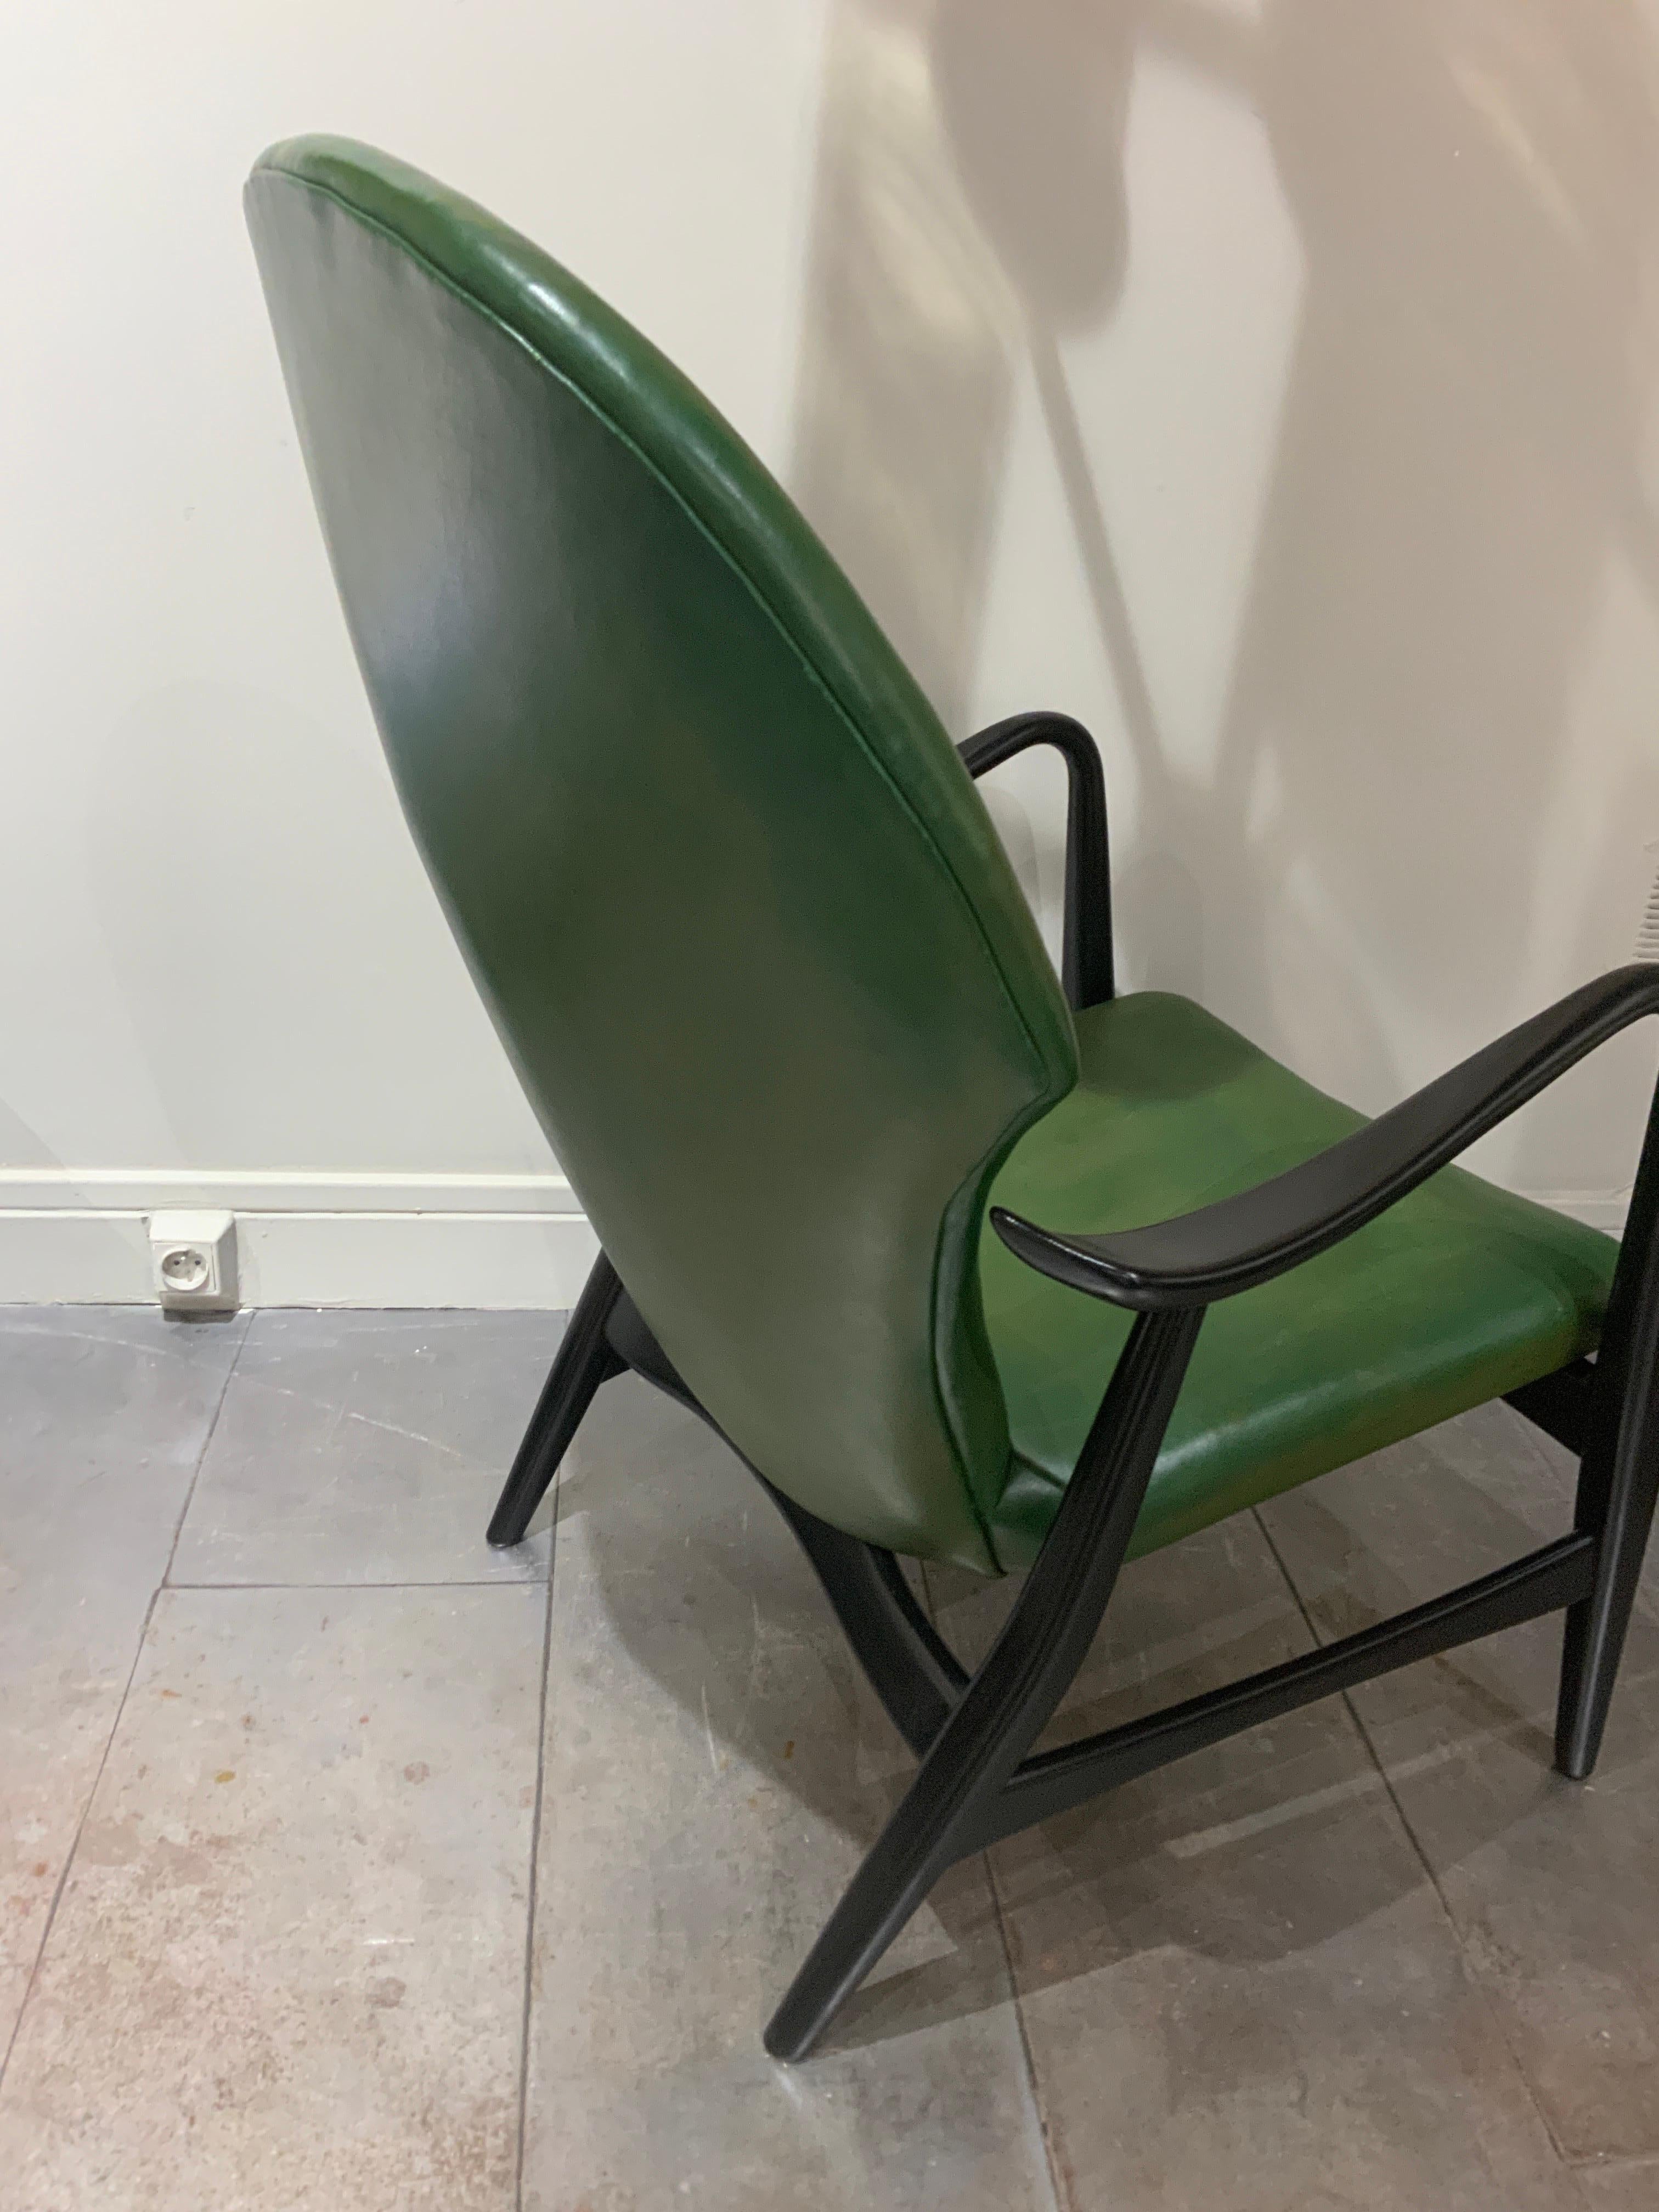 Henry Hans Schubell easy chair 
Seat and back upholstered with green leather
Manufactured by Schubell & Madsen circa 1950